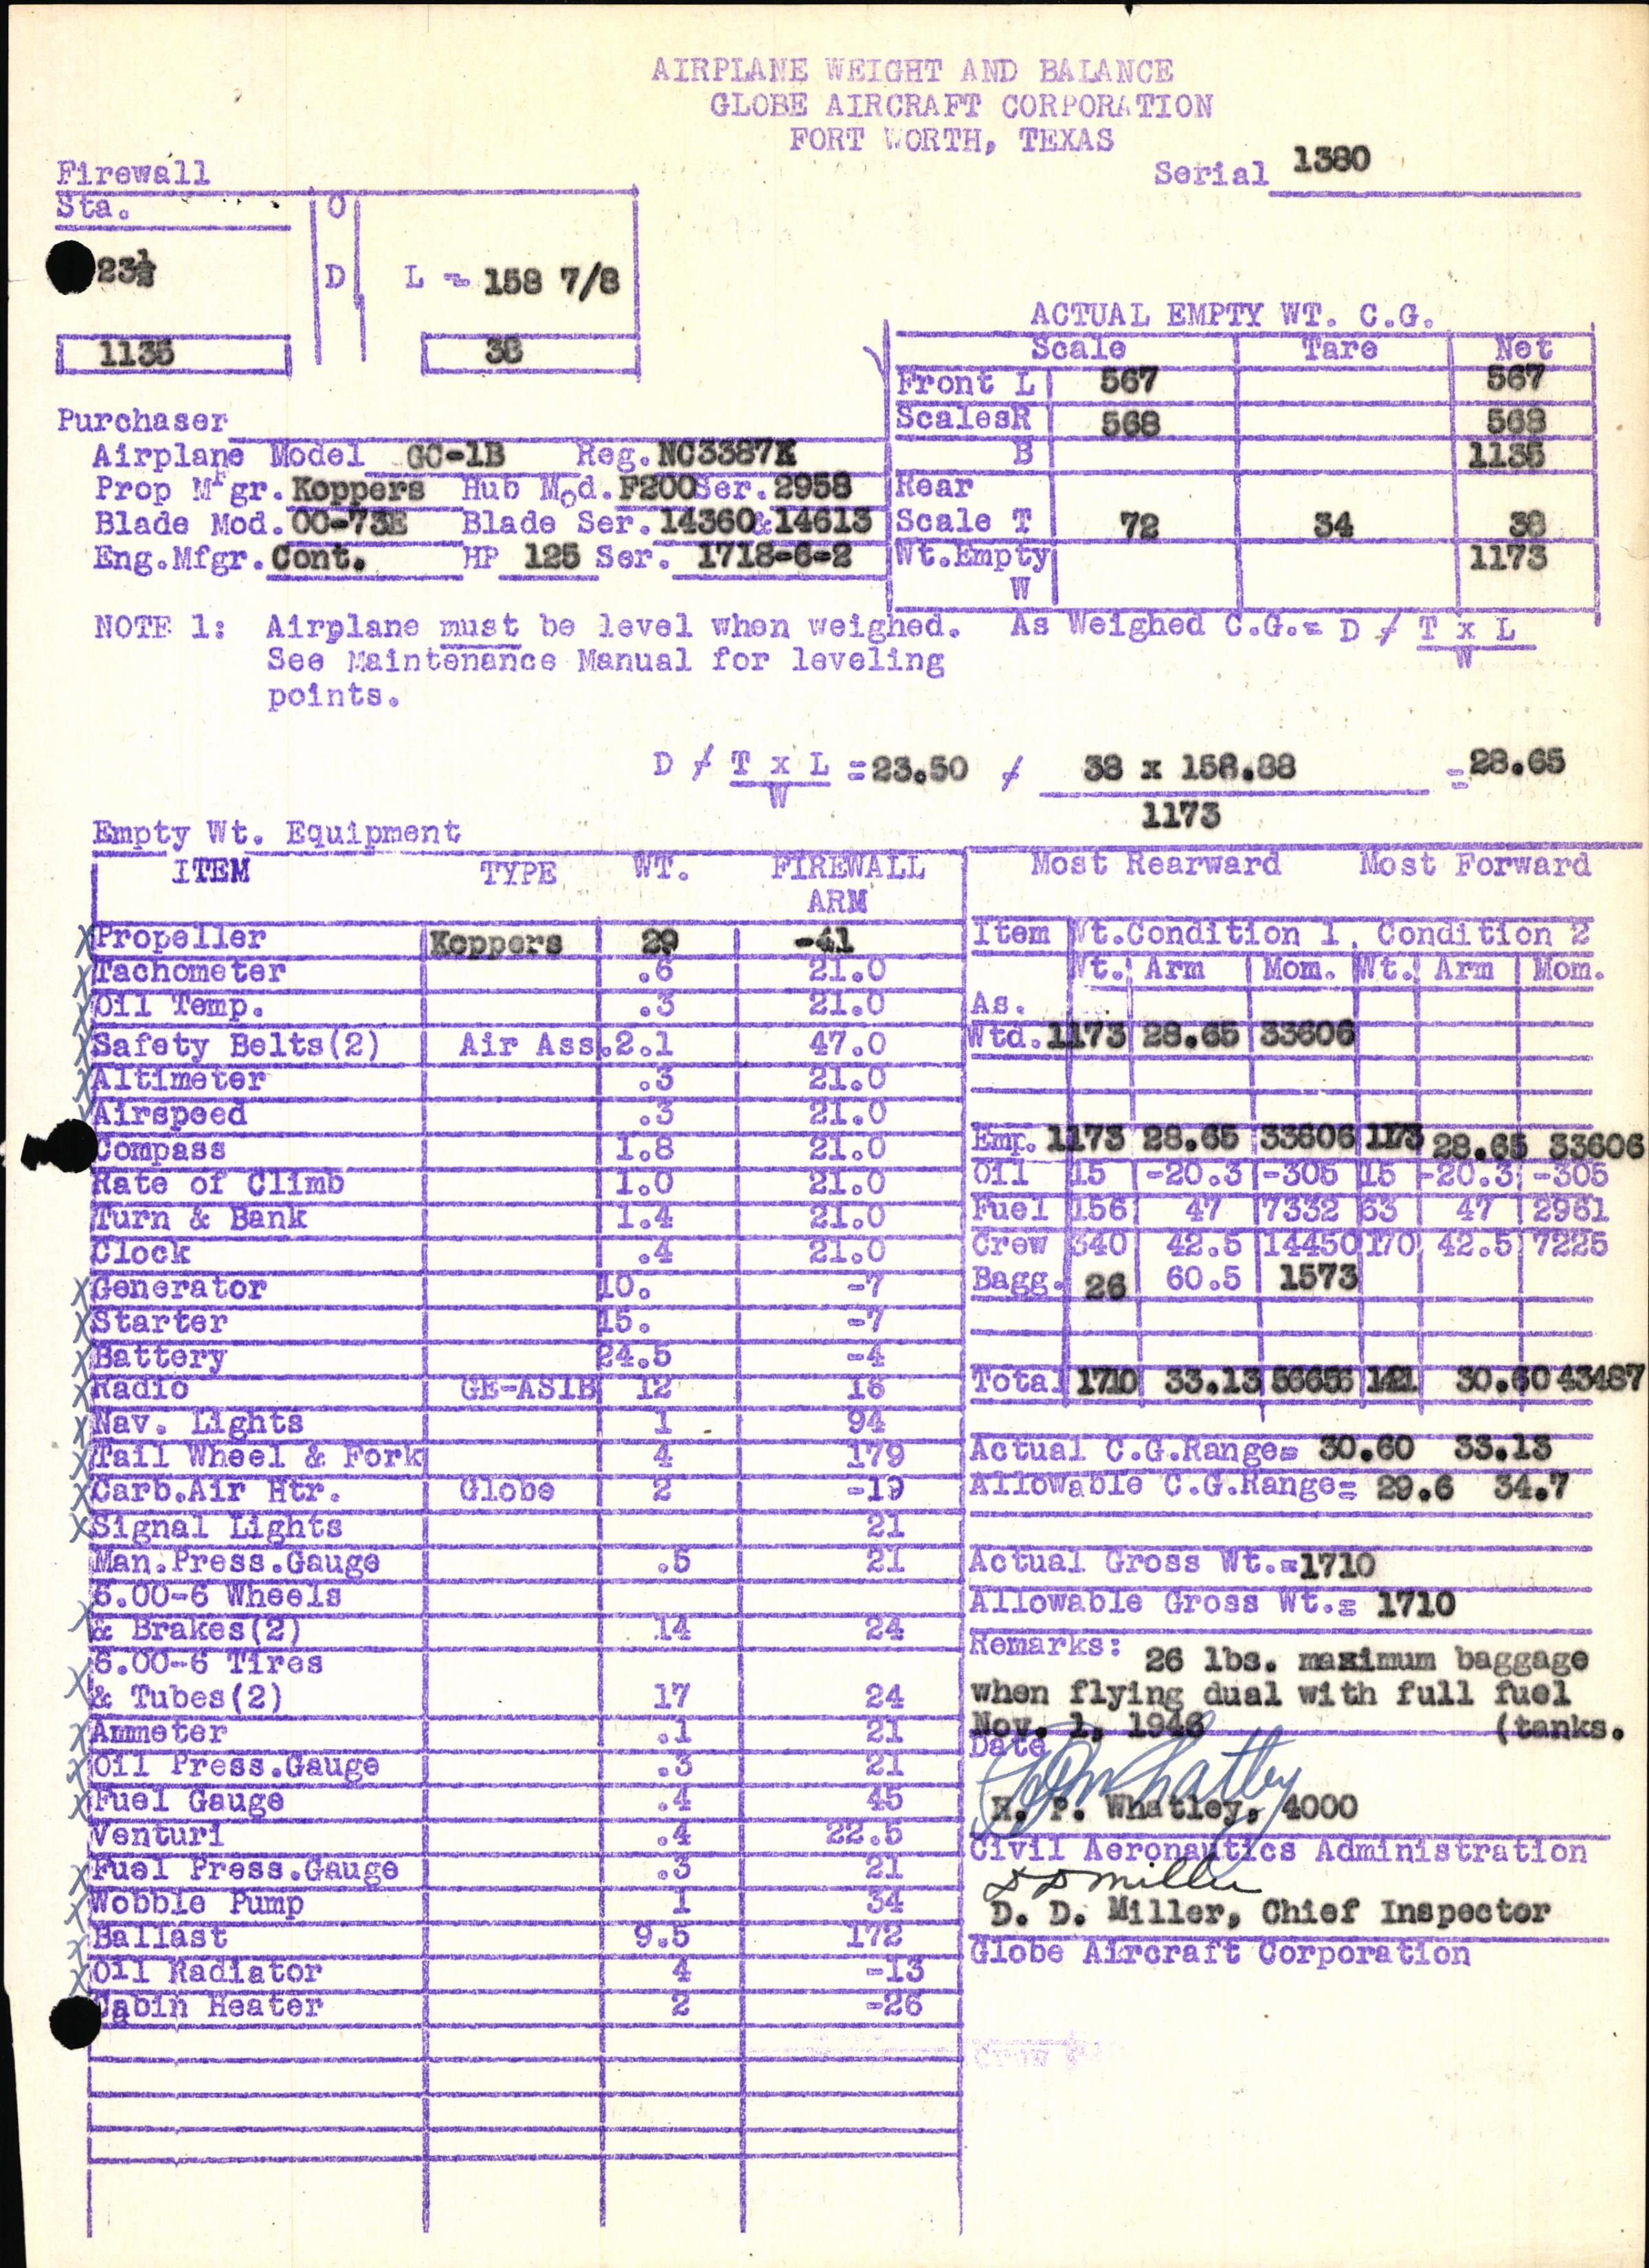 Sample page 7 from AirCorps Library document: Technical Information for Serial Number 1380